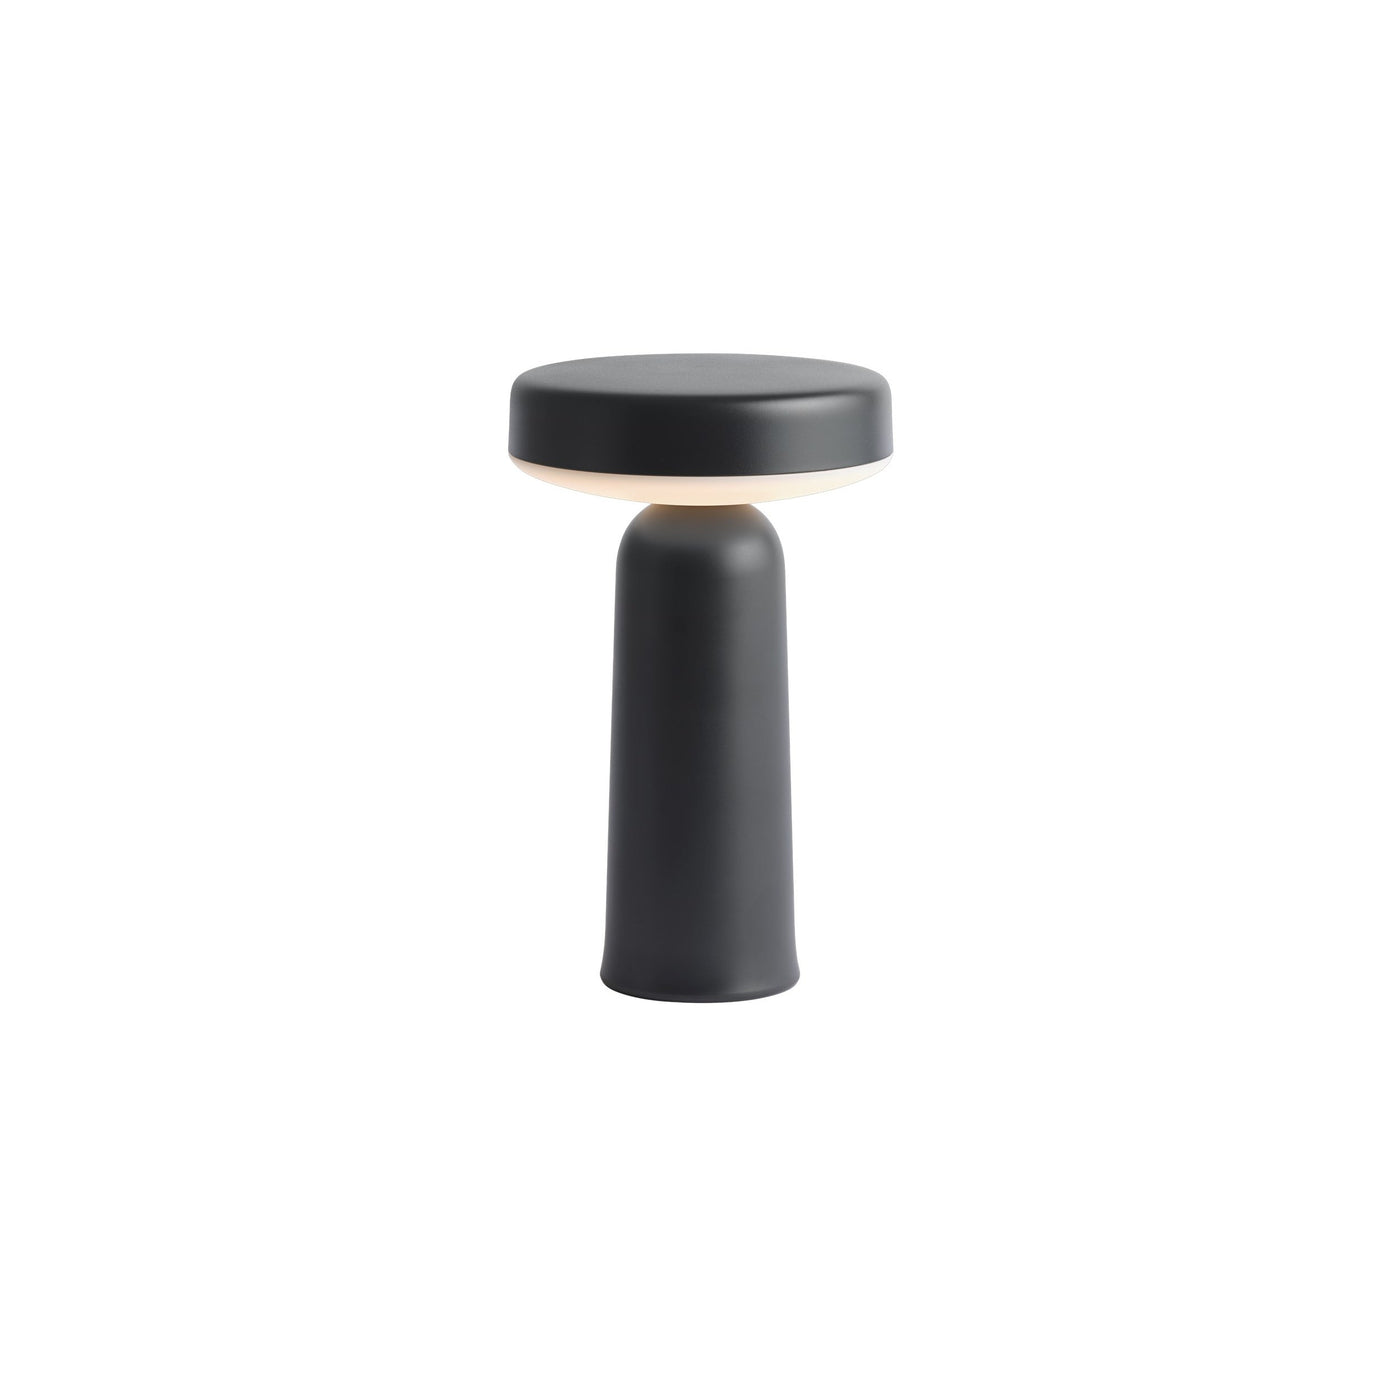 Muuto Ease Portable Lamp. Free UK delivery at someday designs. #colour_black